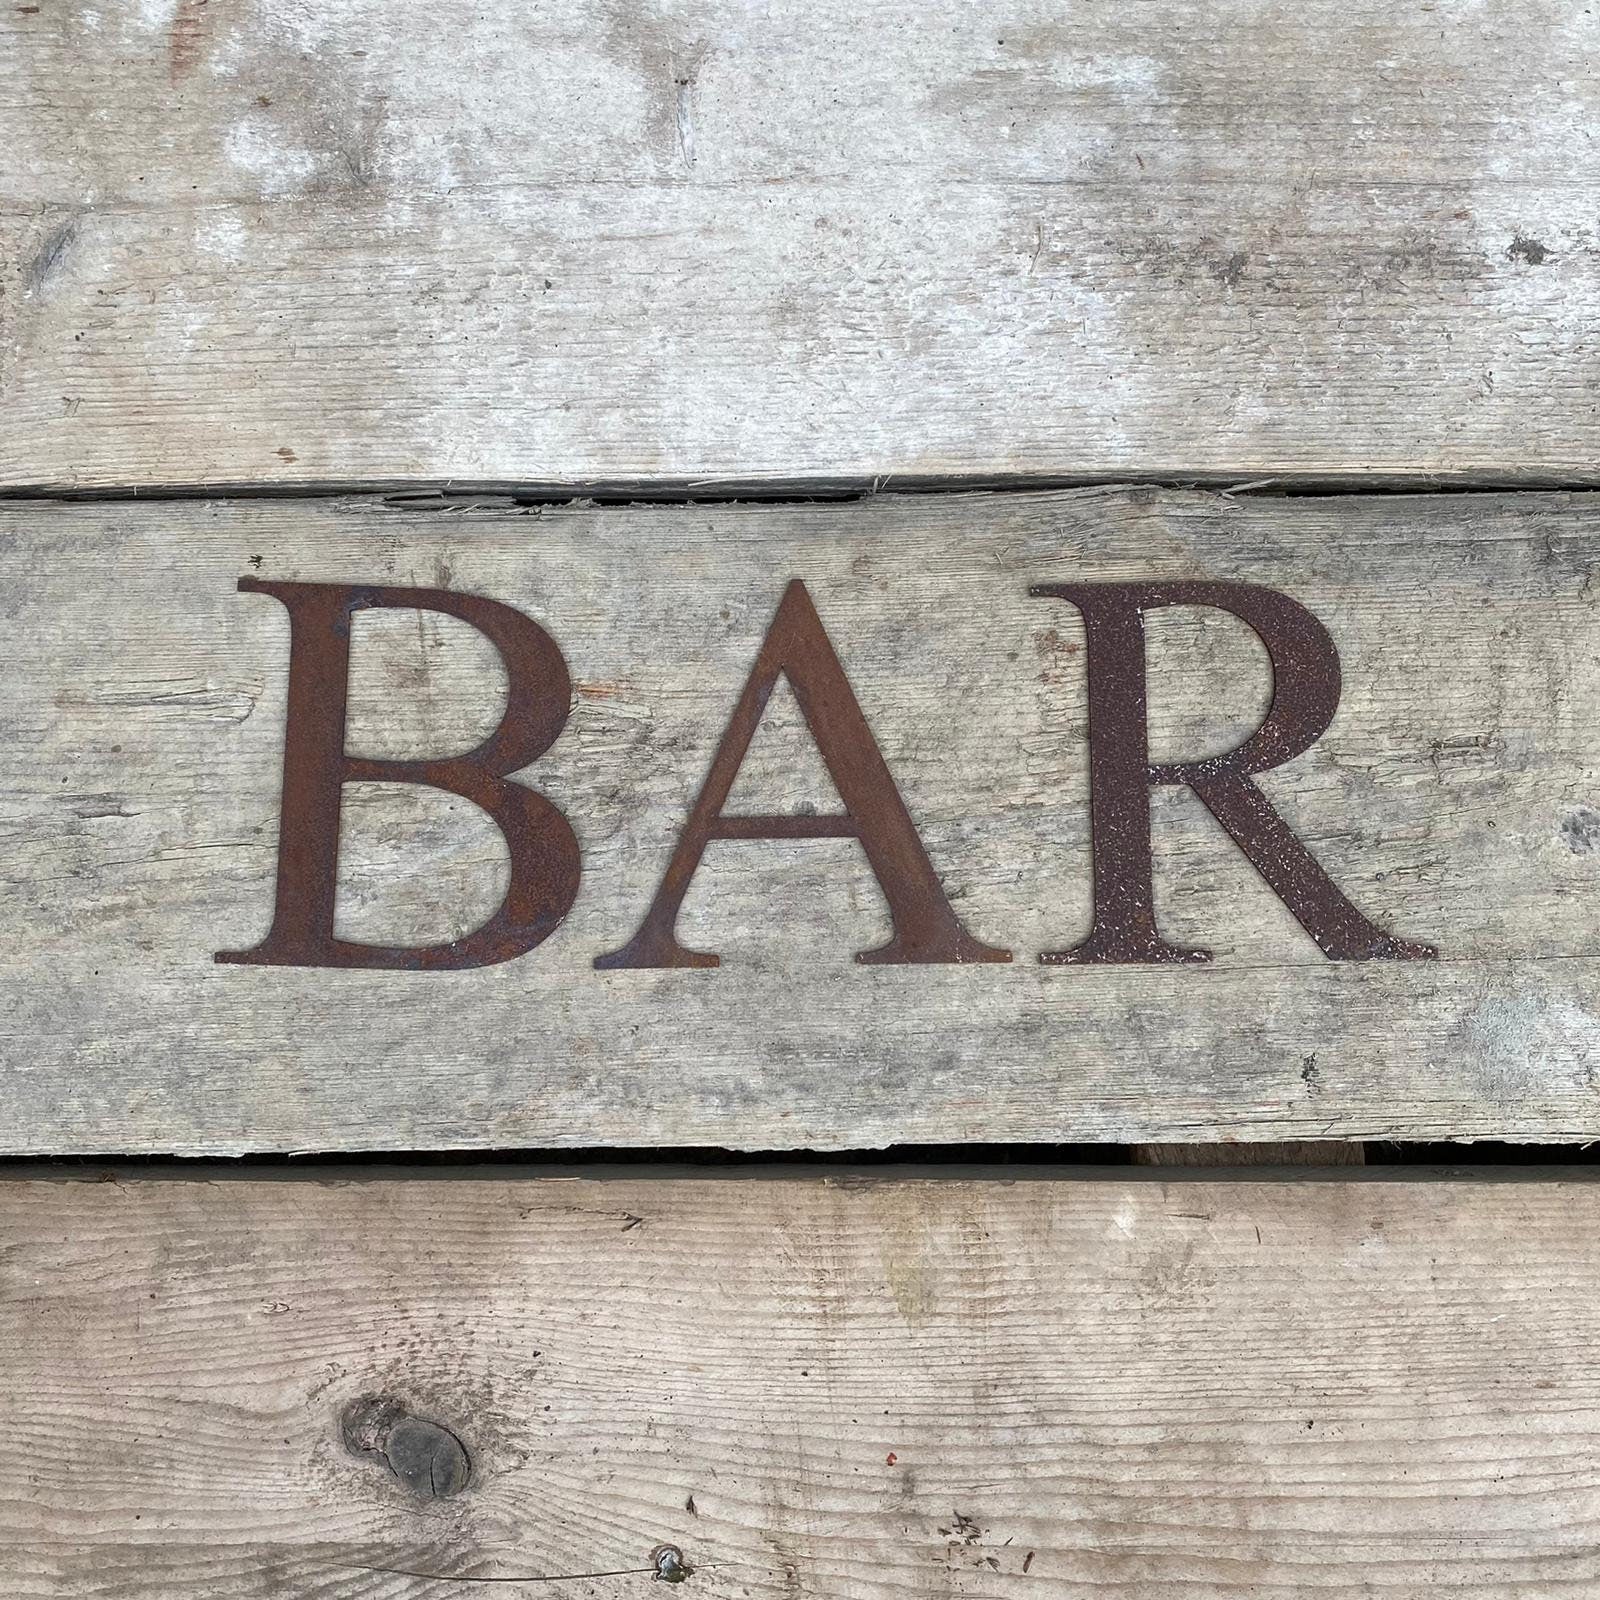 Classic style lettering spelling out BAR